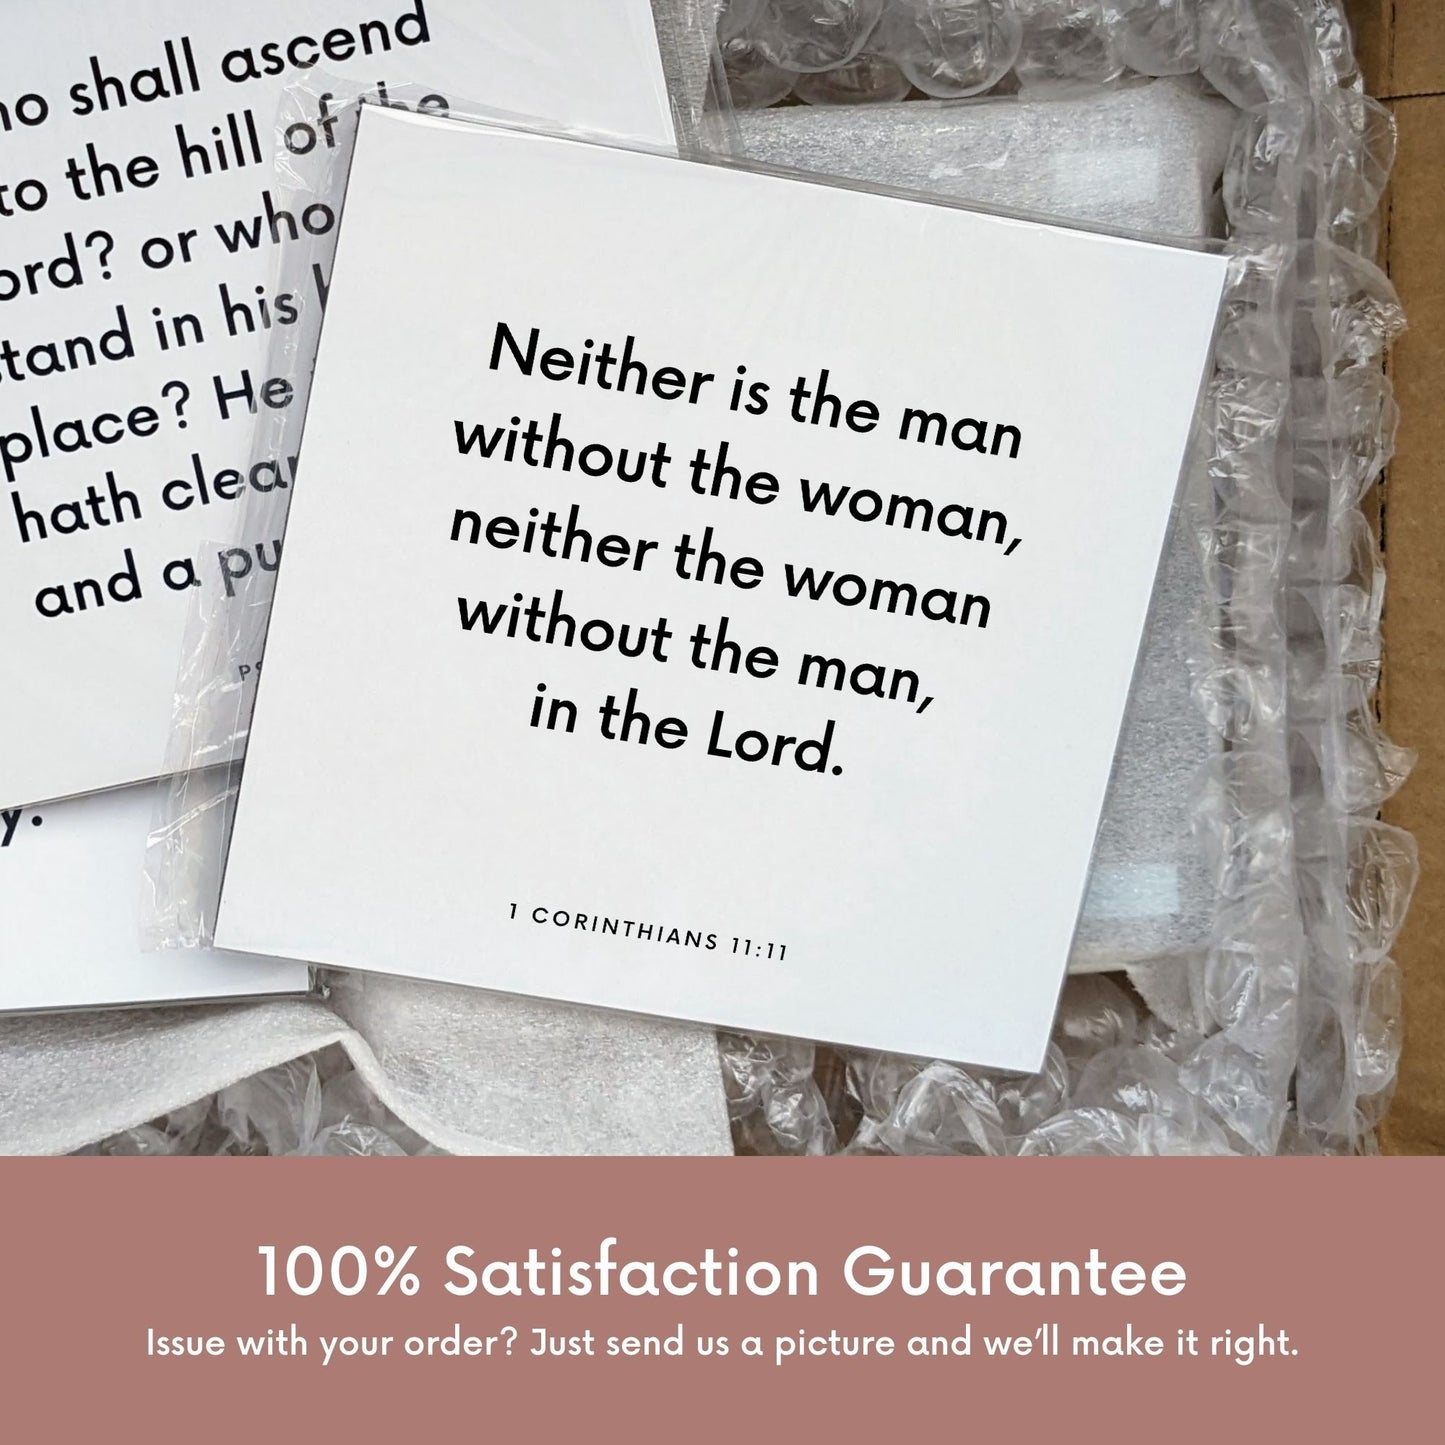 Shipping materials for scripture tile of 1 Corinthians 11:11 - "Neither is the man without the woman, in the lord"